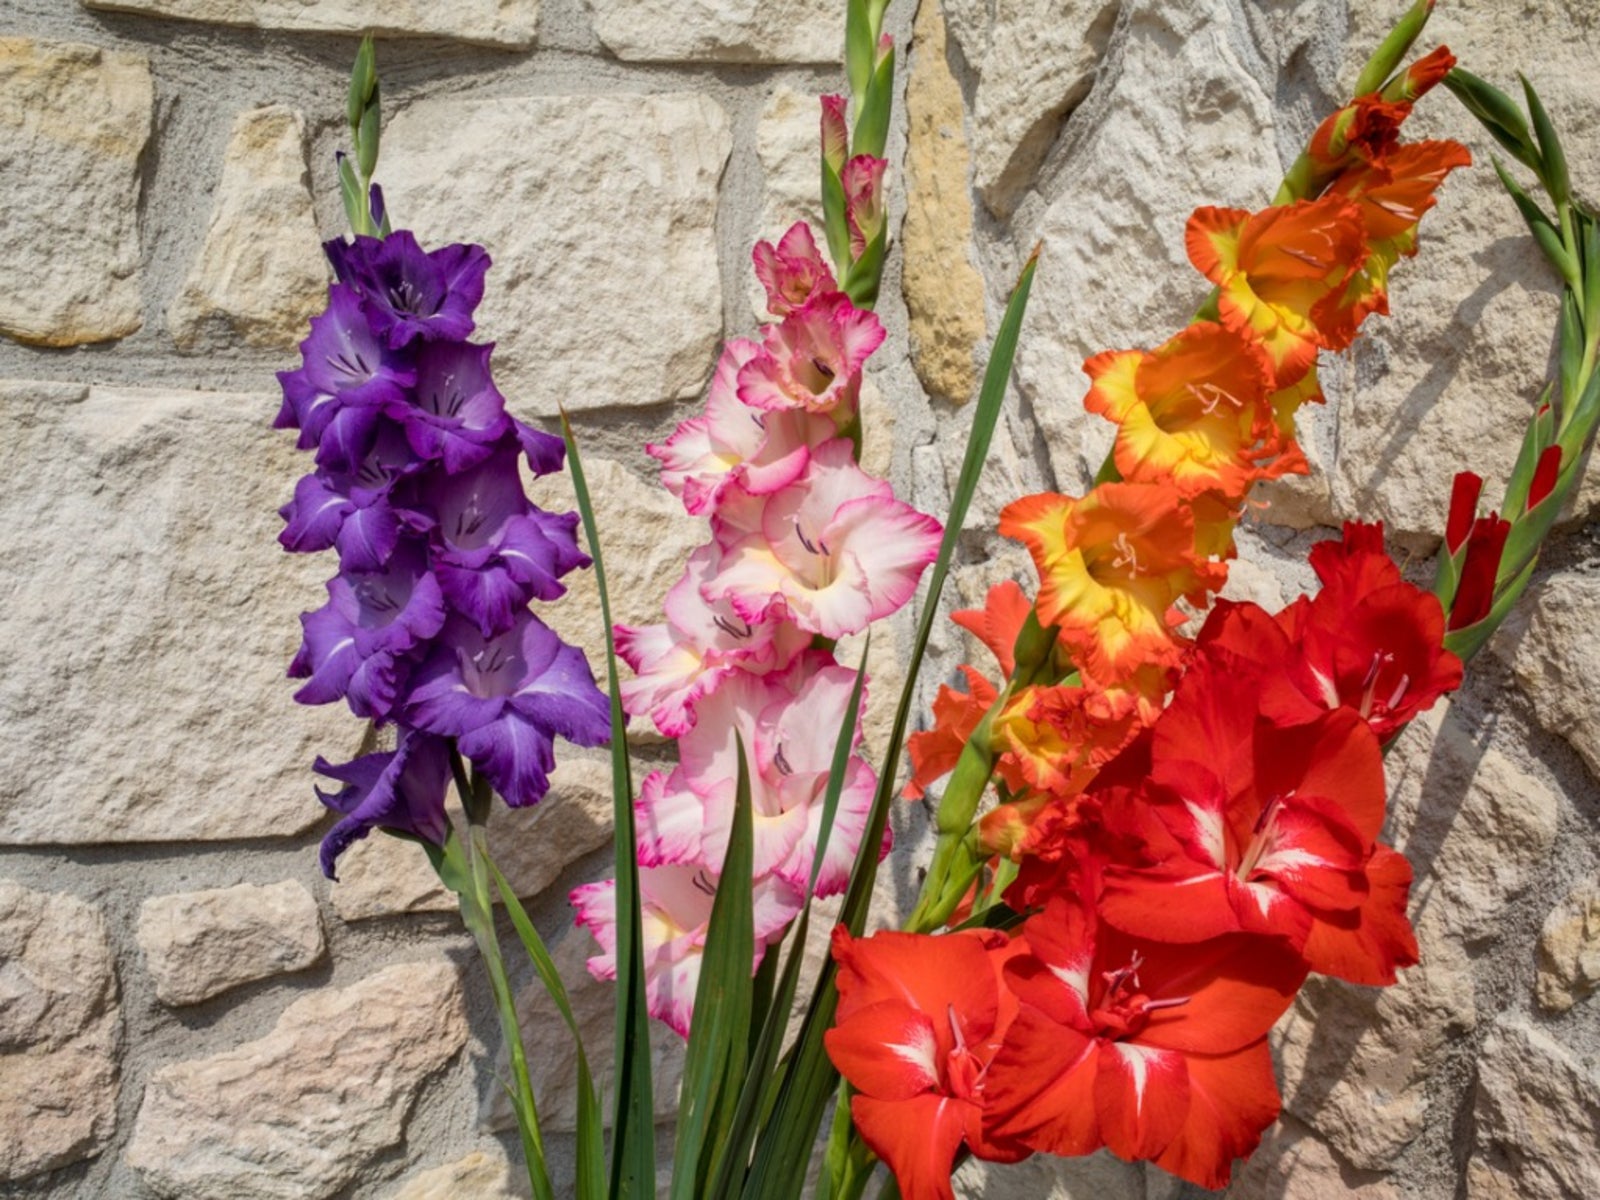 How to plant gladioli in pots